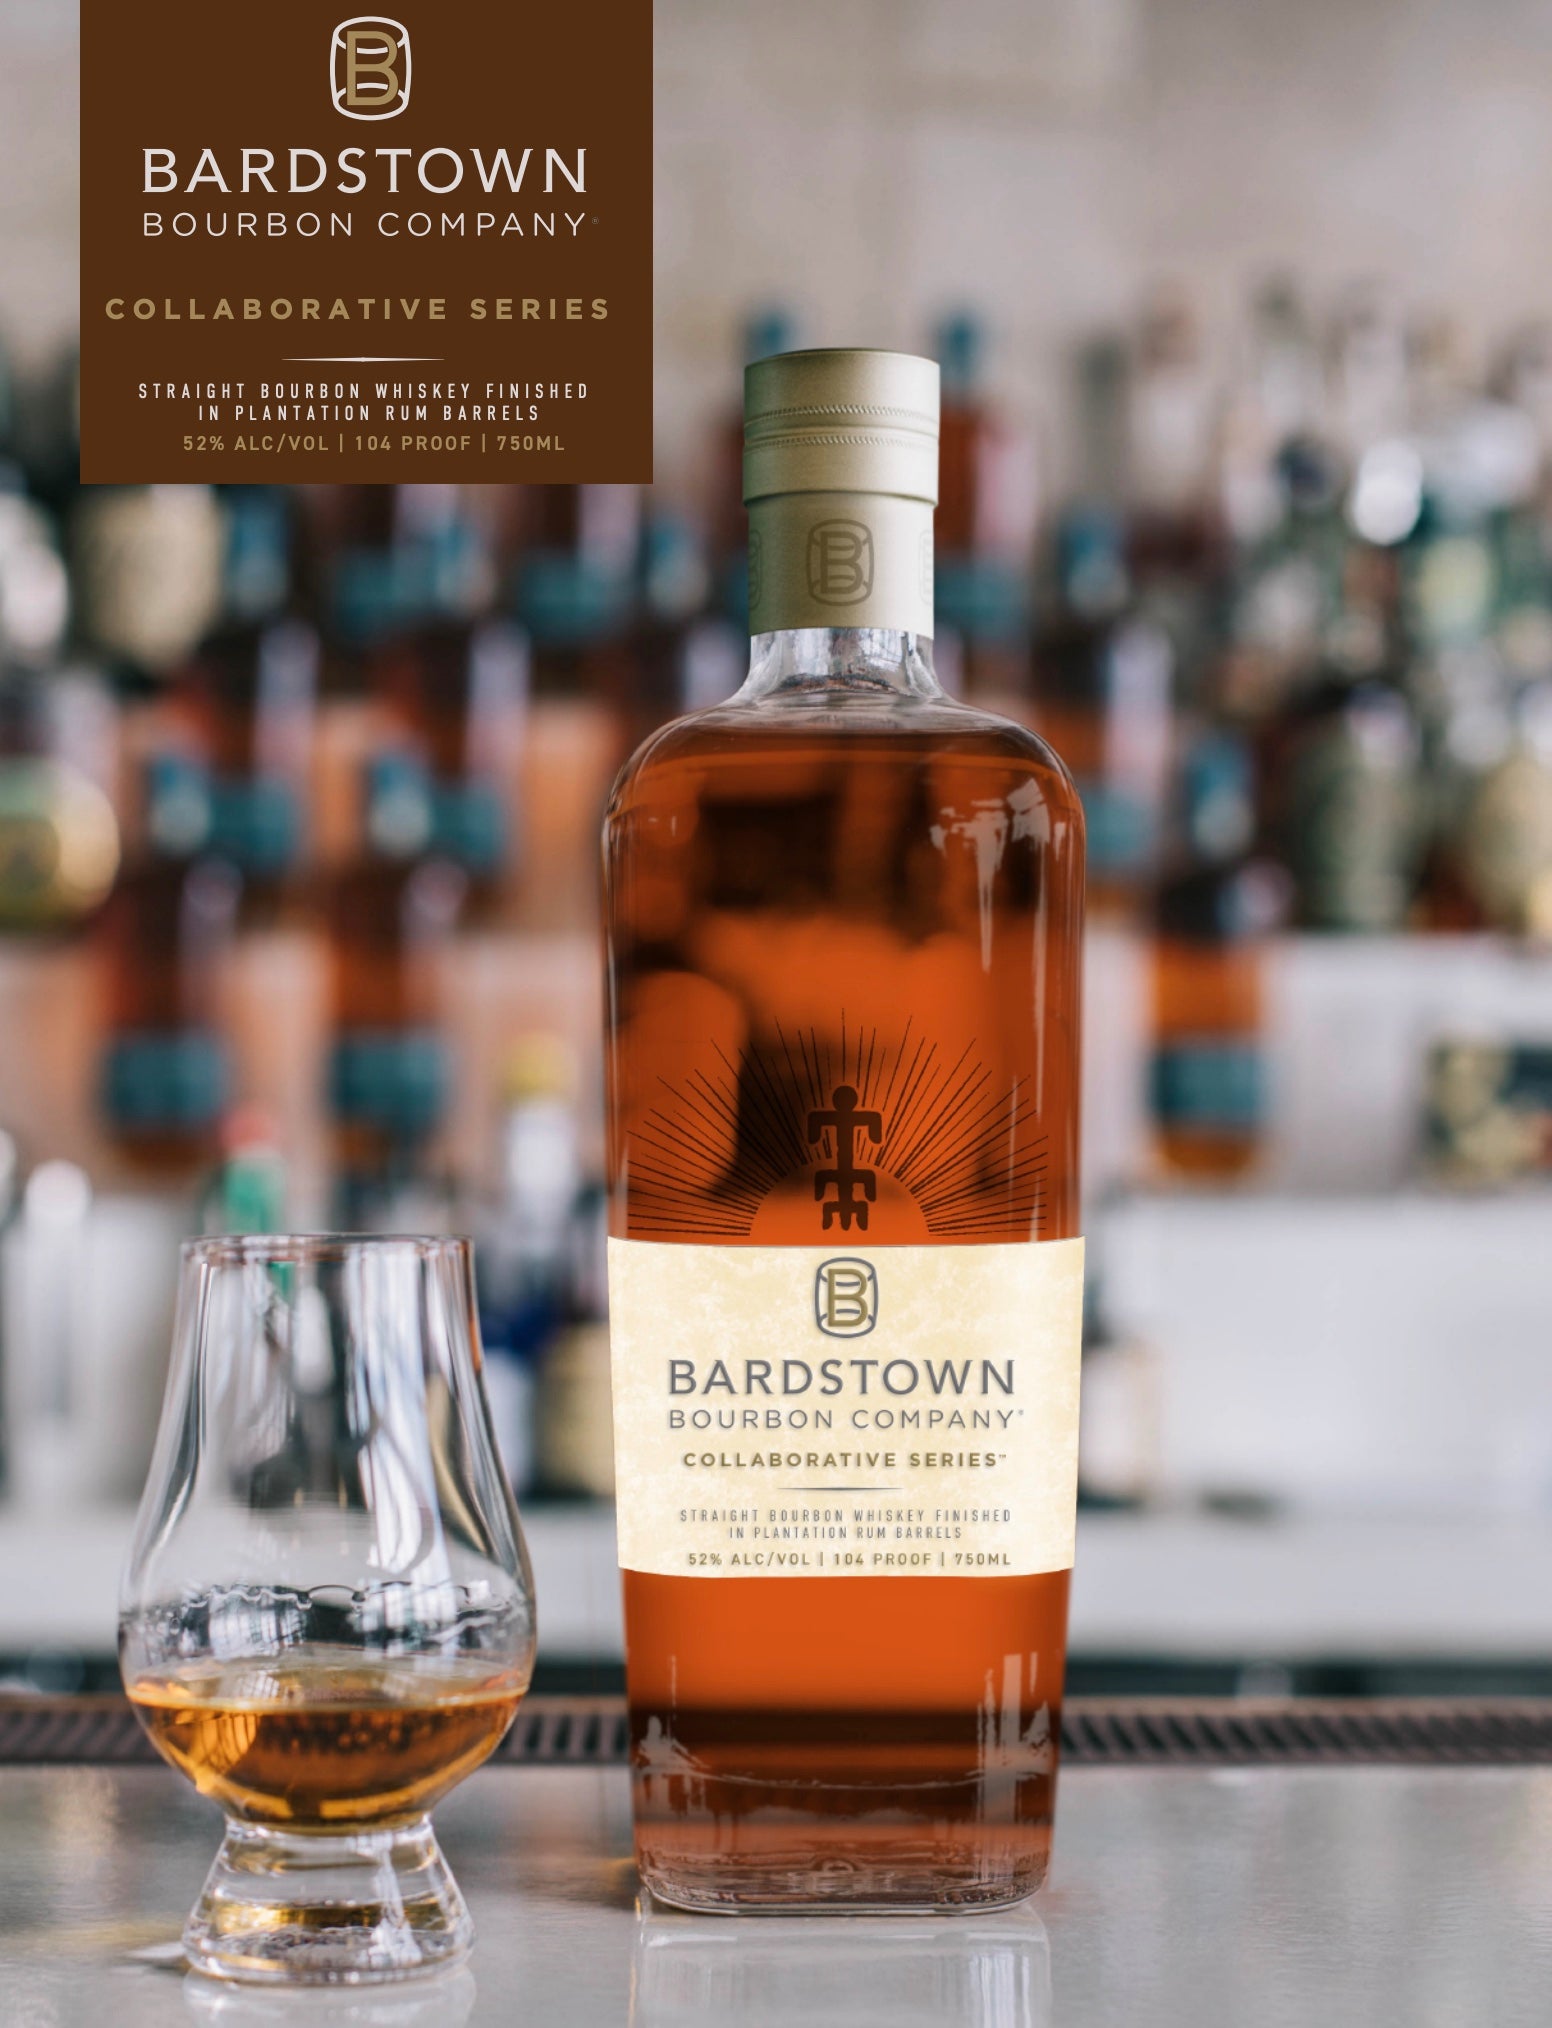 Bardstown Bourbon Company Collaborative Series Plantation Rum Finished Whiskey